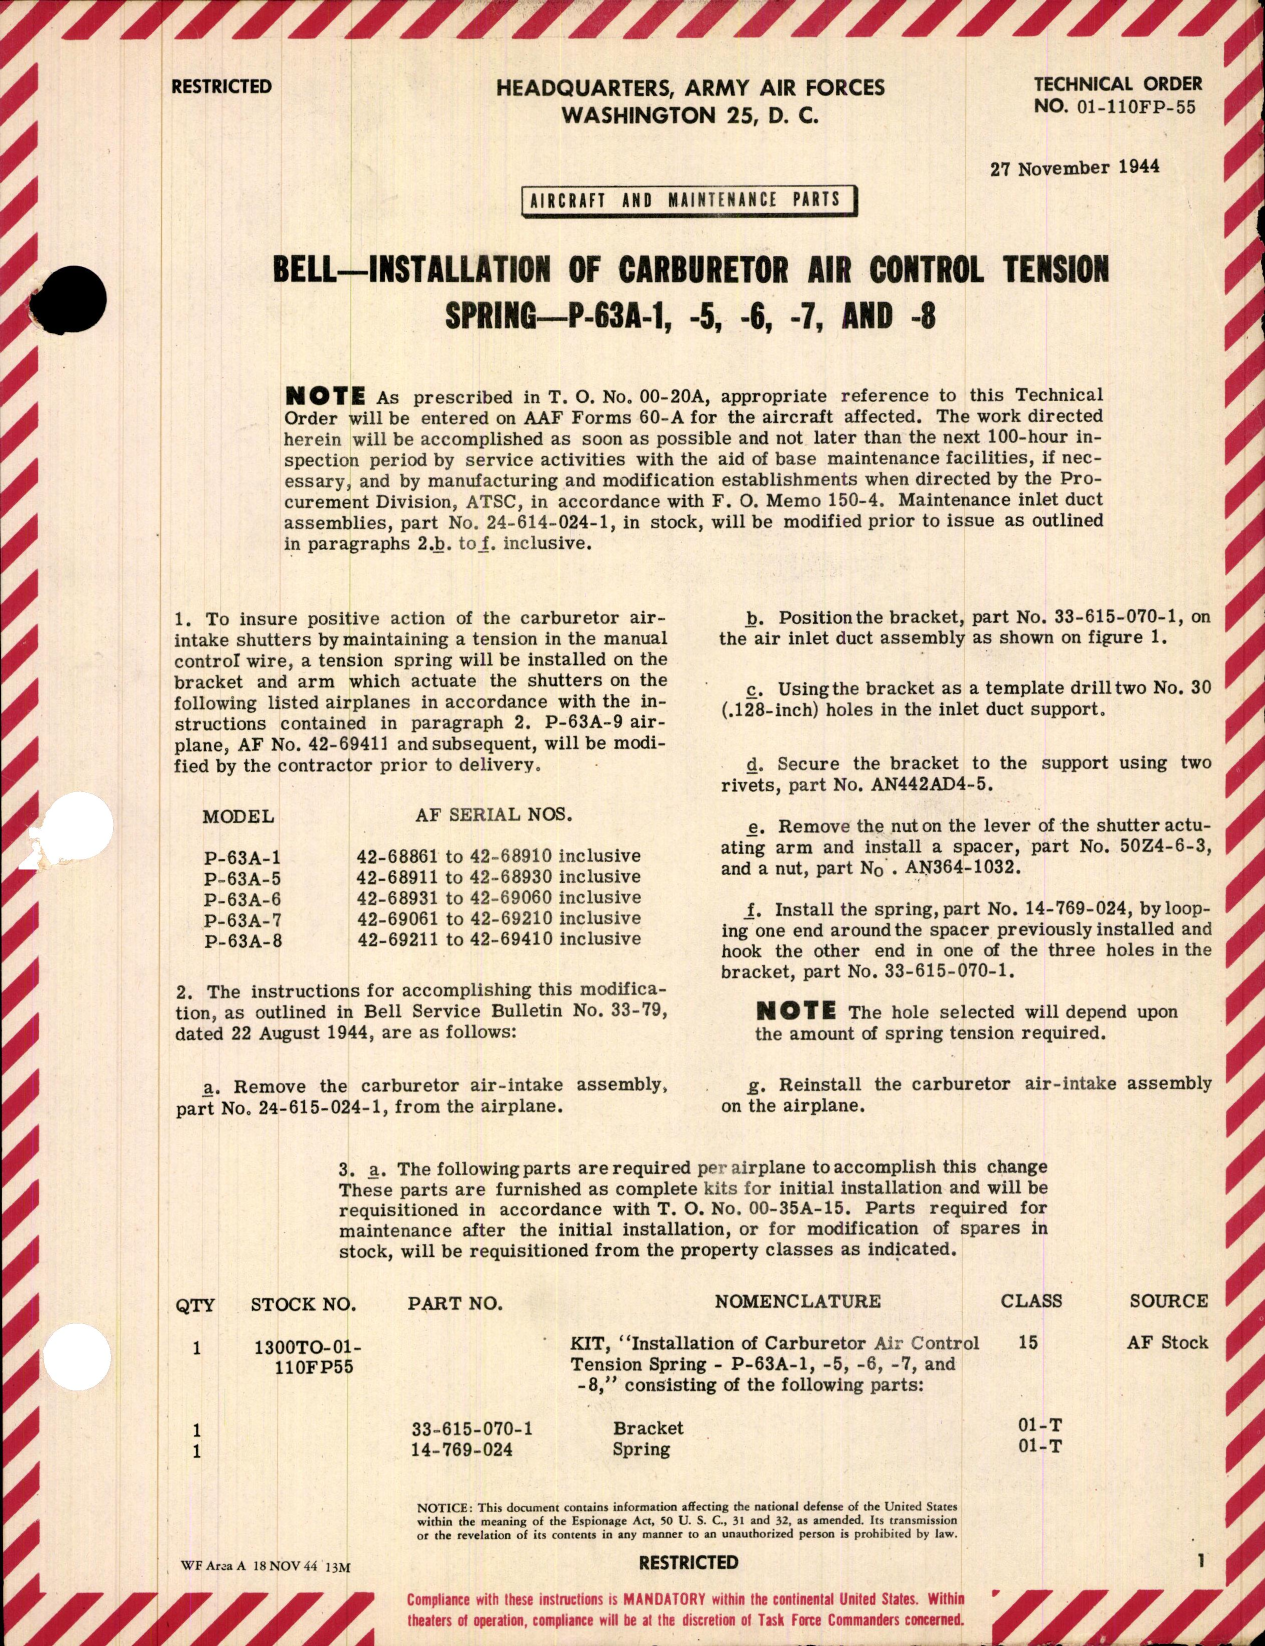 Sample page 1 from AirCorps Library document: Installation of Carburetor Air Control Tension Spring